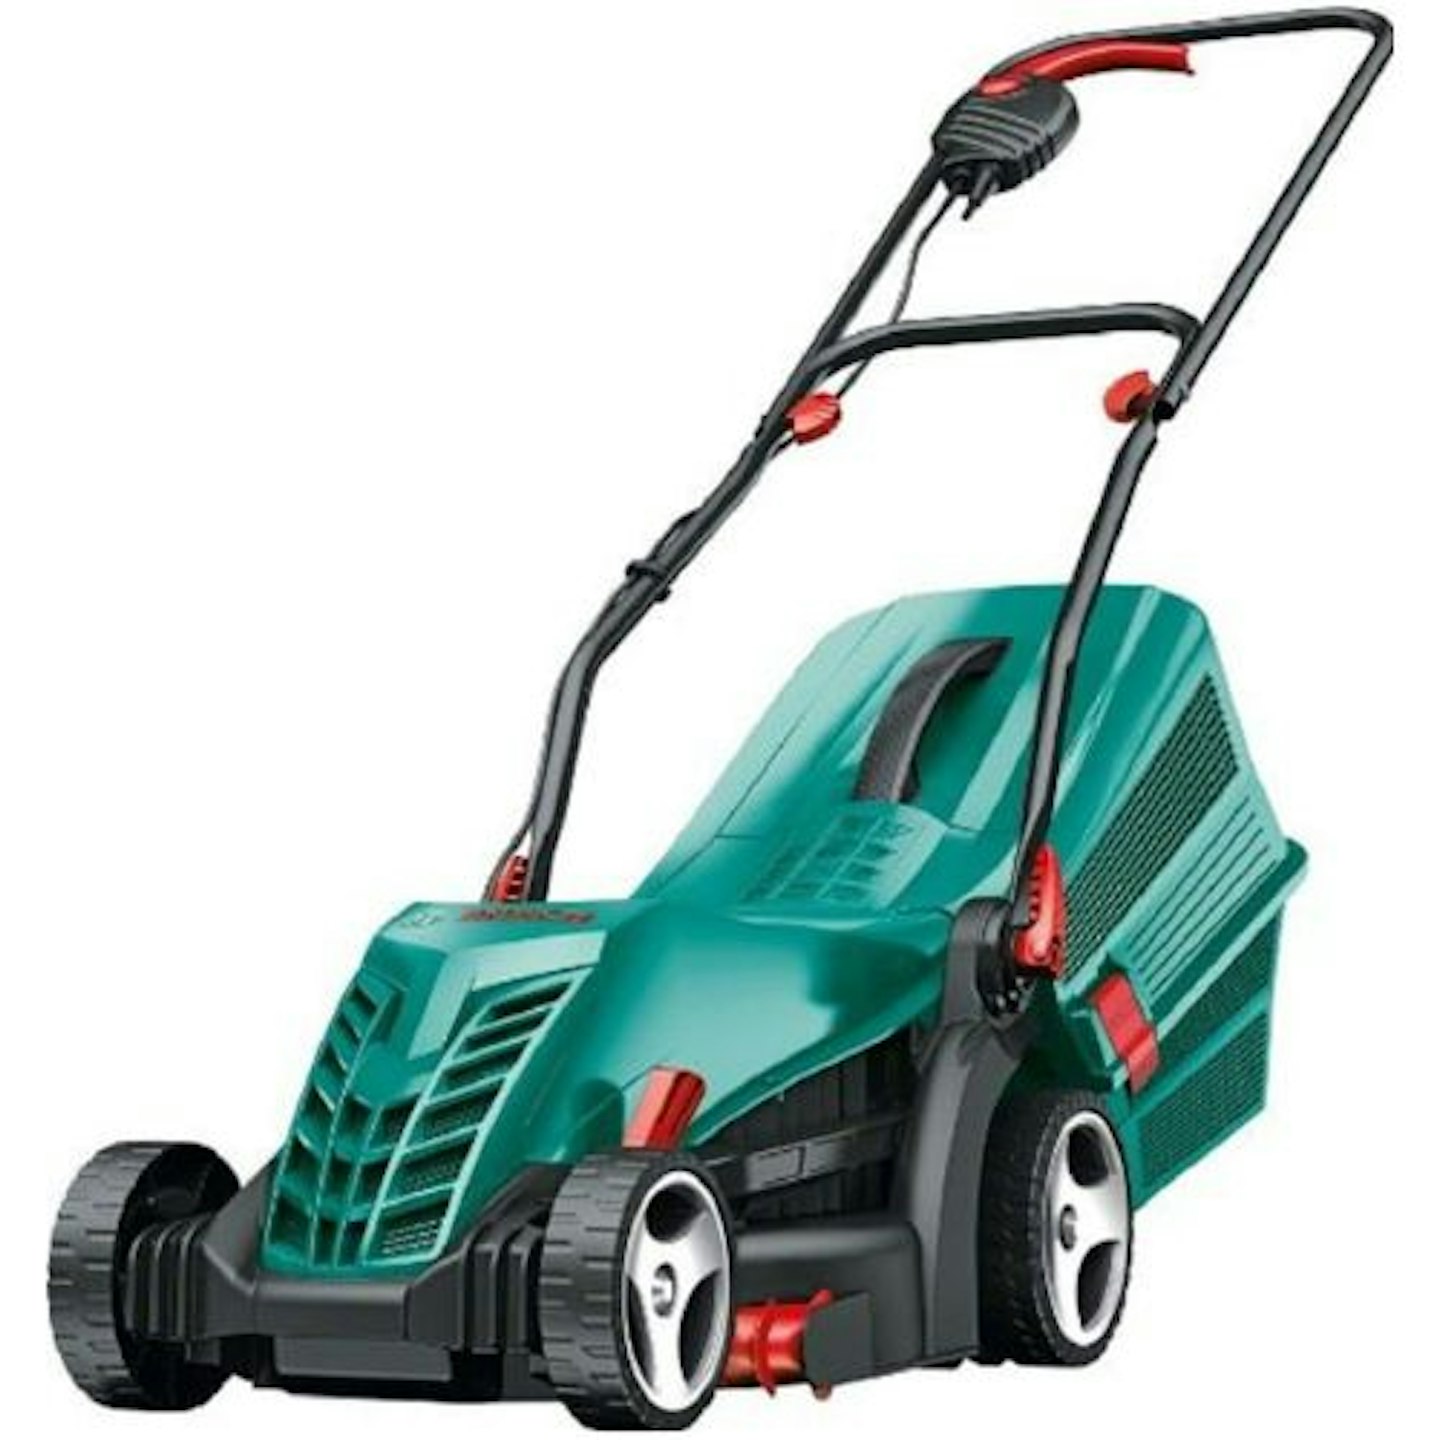 Bosch Home and Garden Rotak 34R Electric Lawnmower